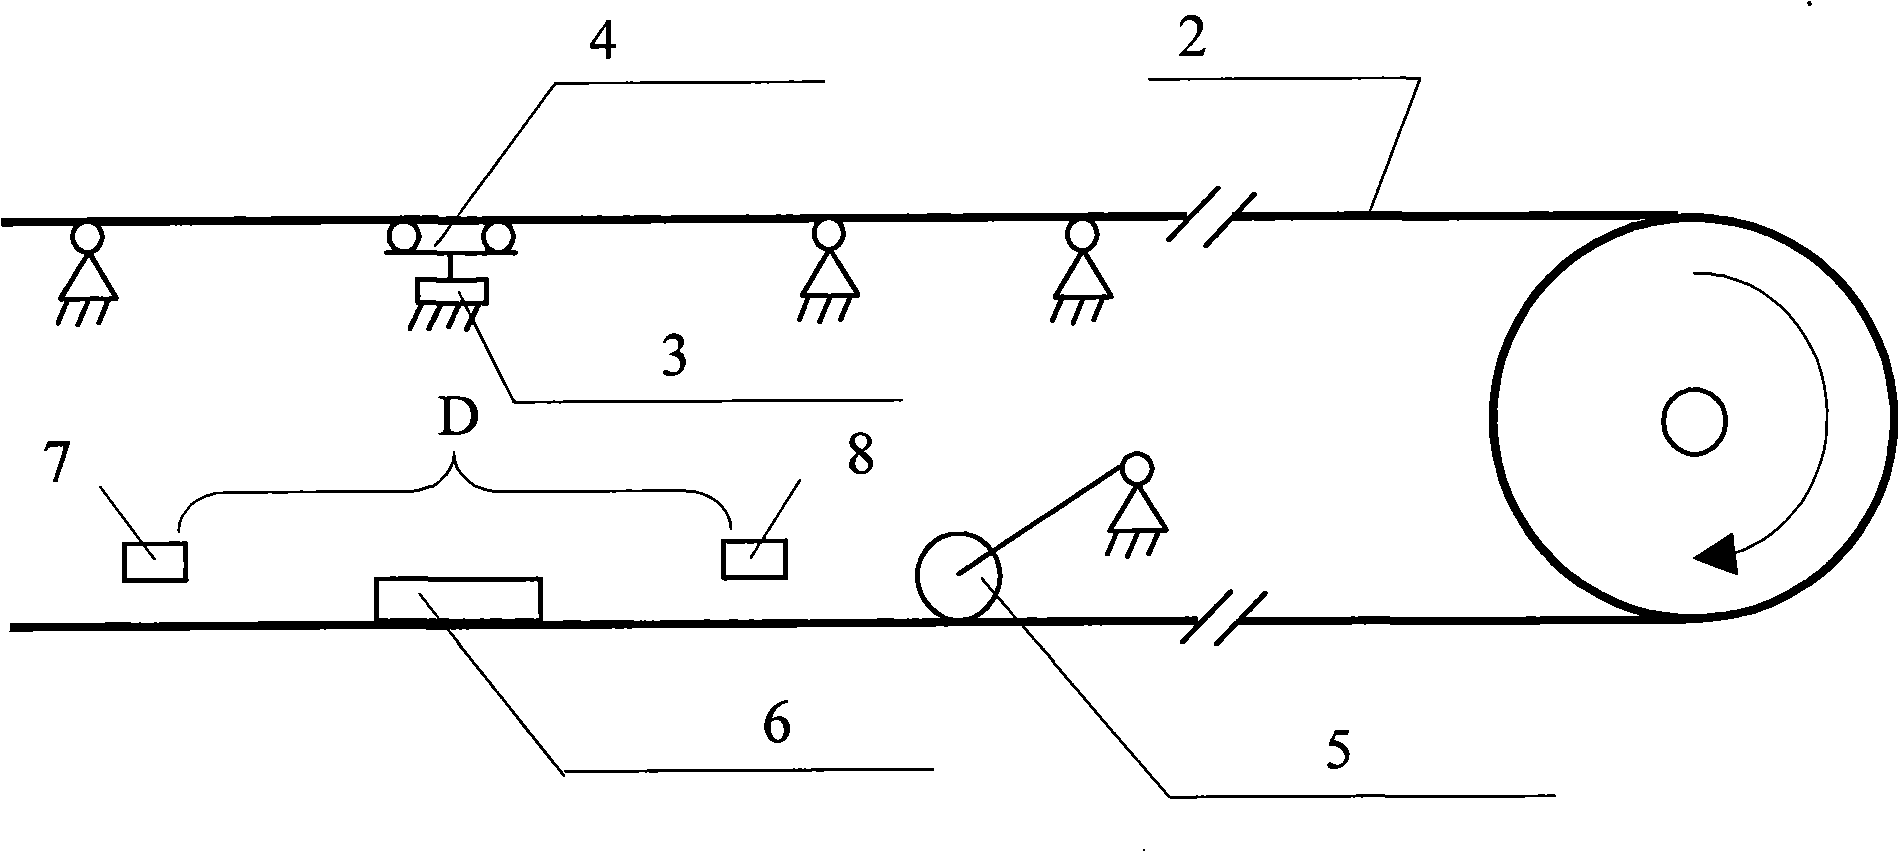 Belt balance weighing subsection decortication method